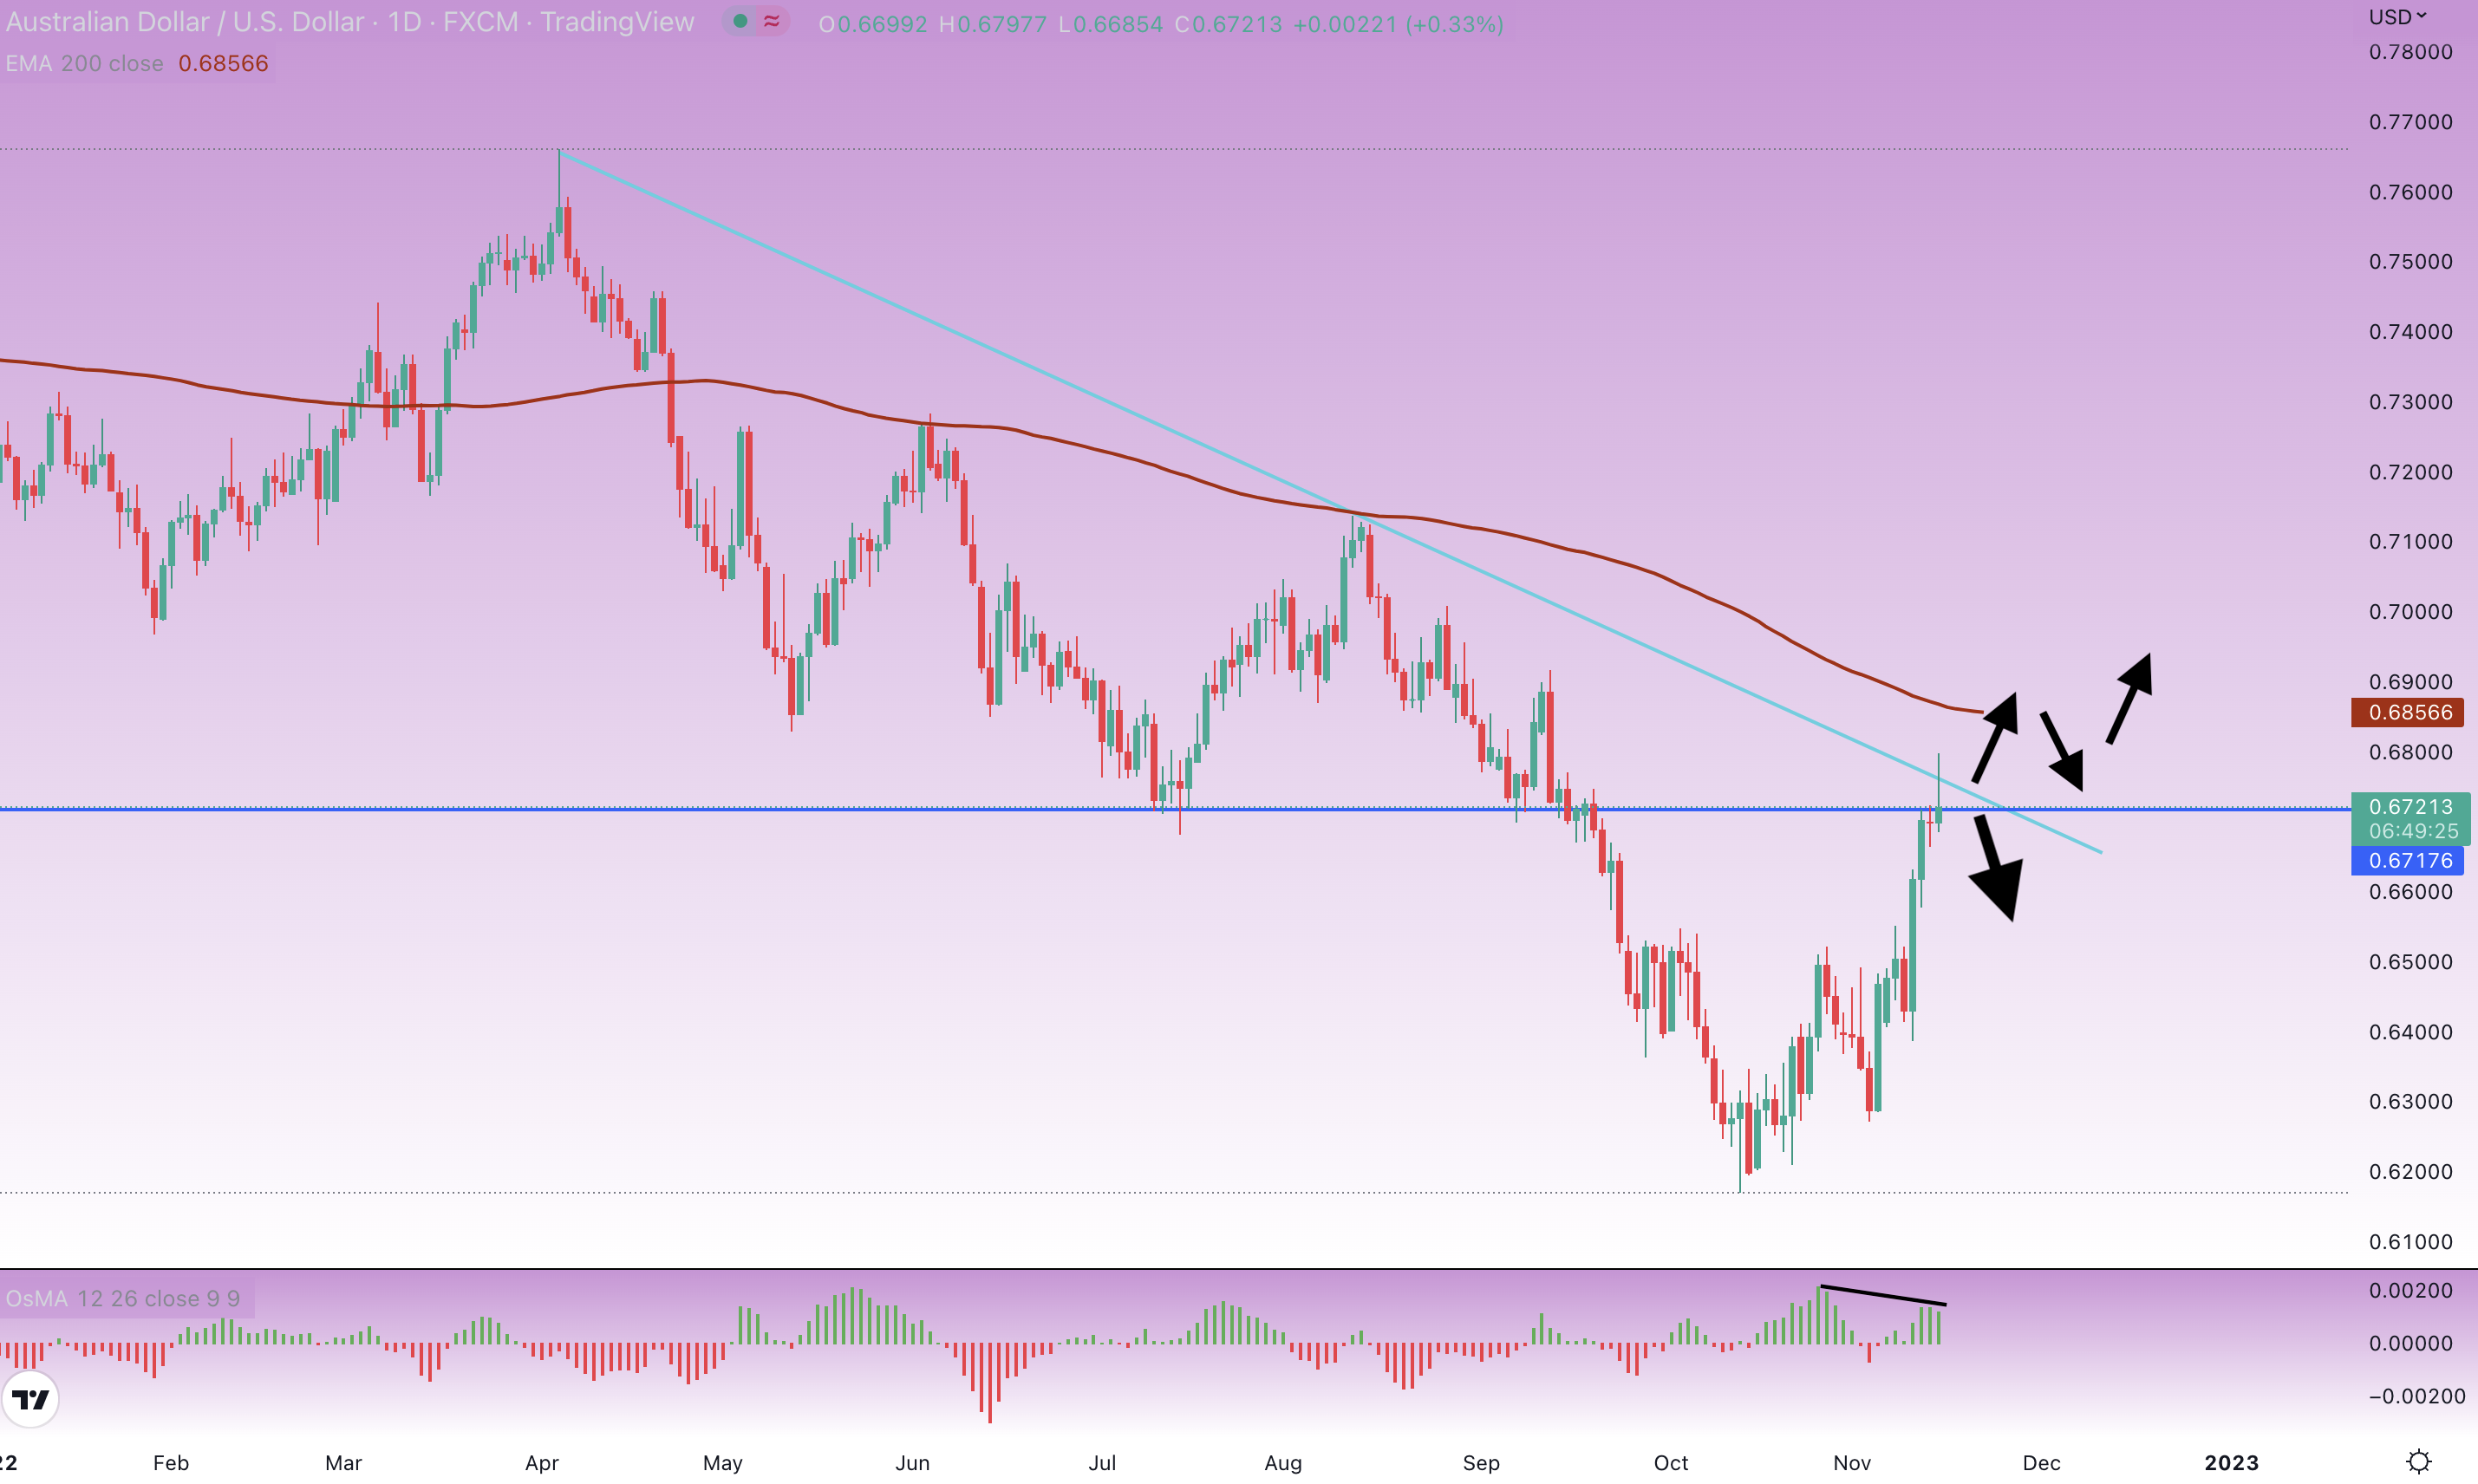 Foreign exchange outlook: AUDUSD, USDCHF and NZDJPY